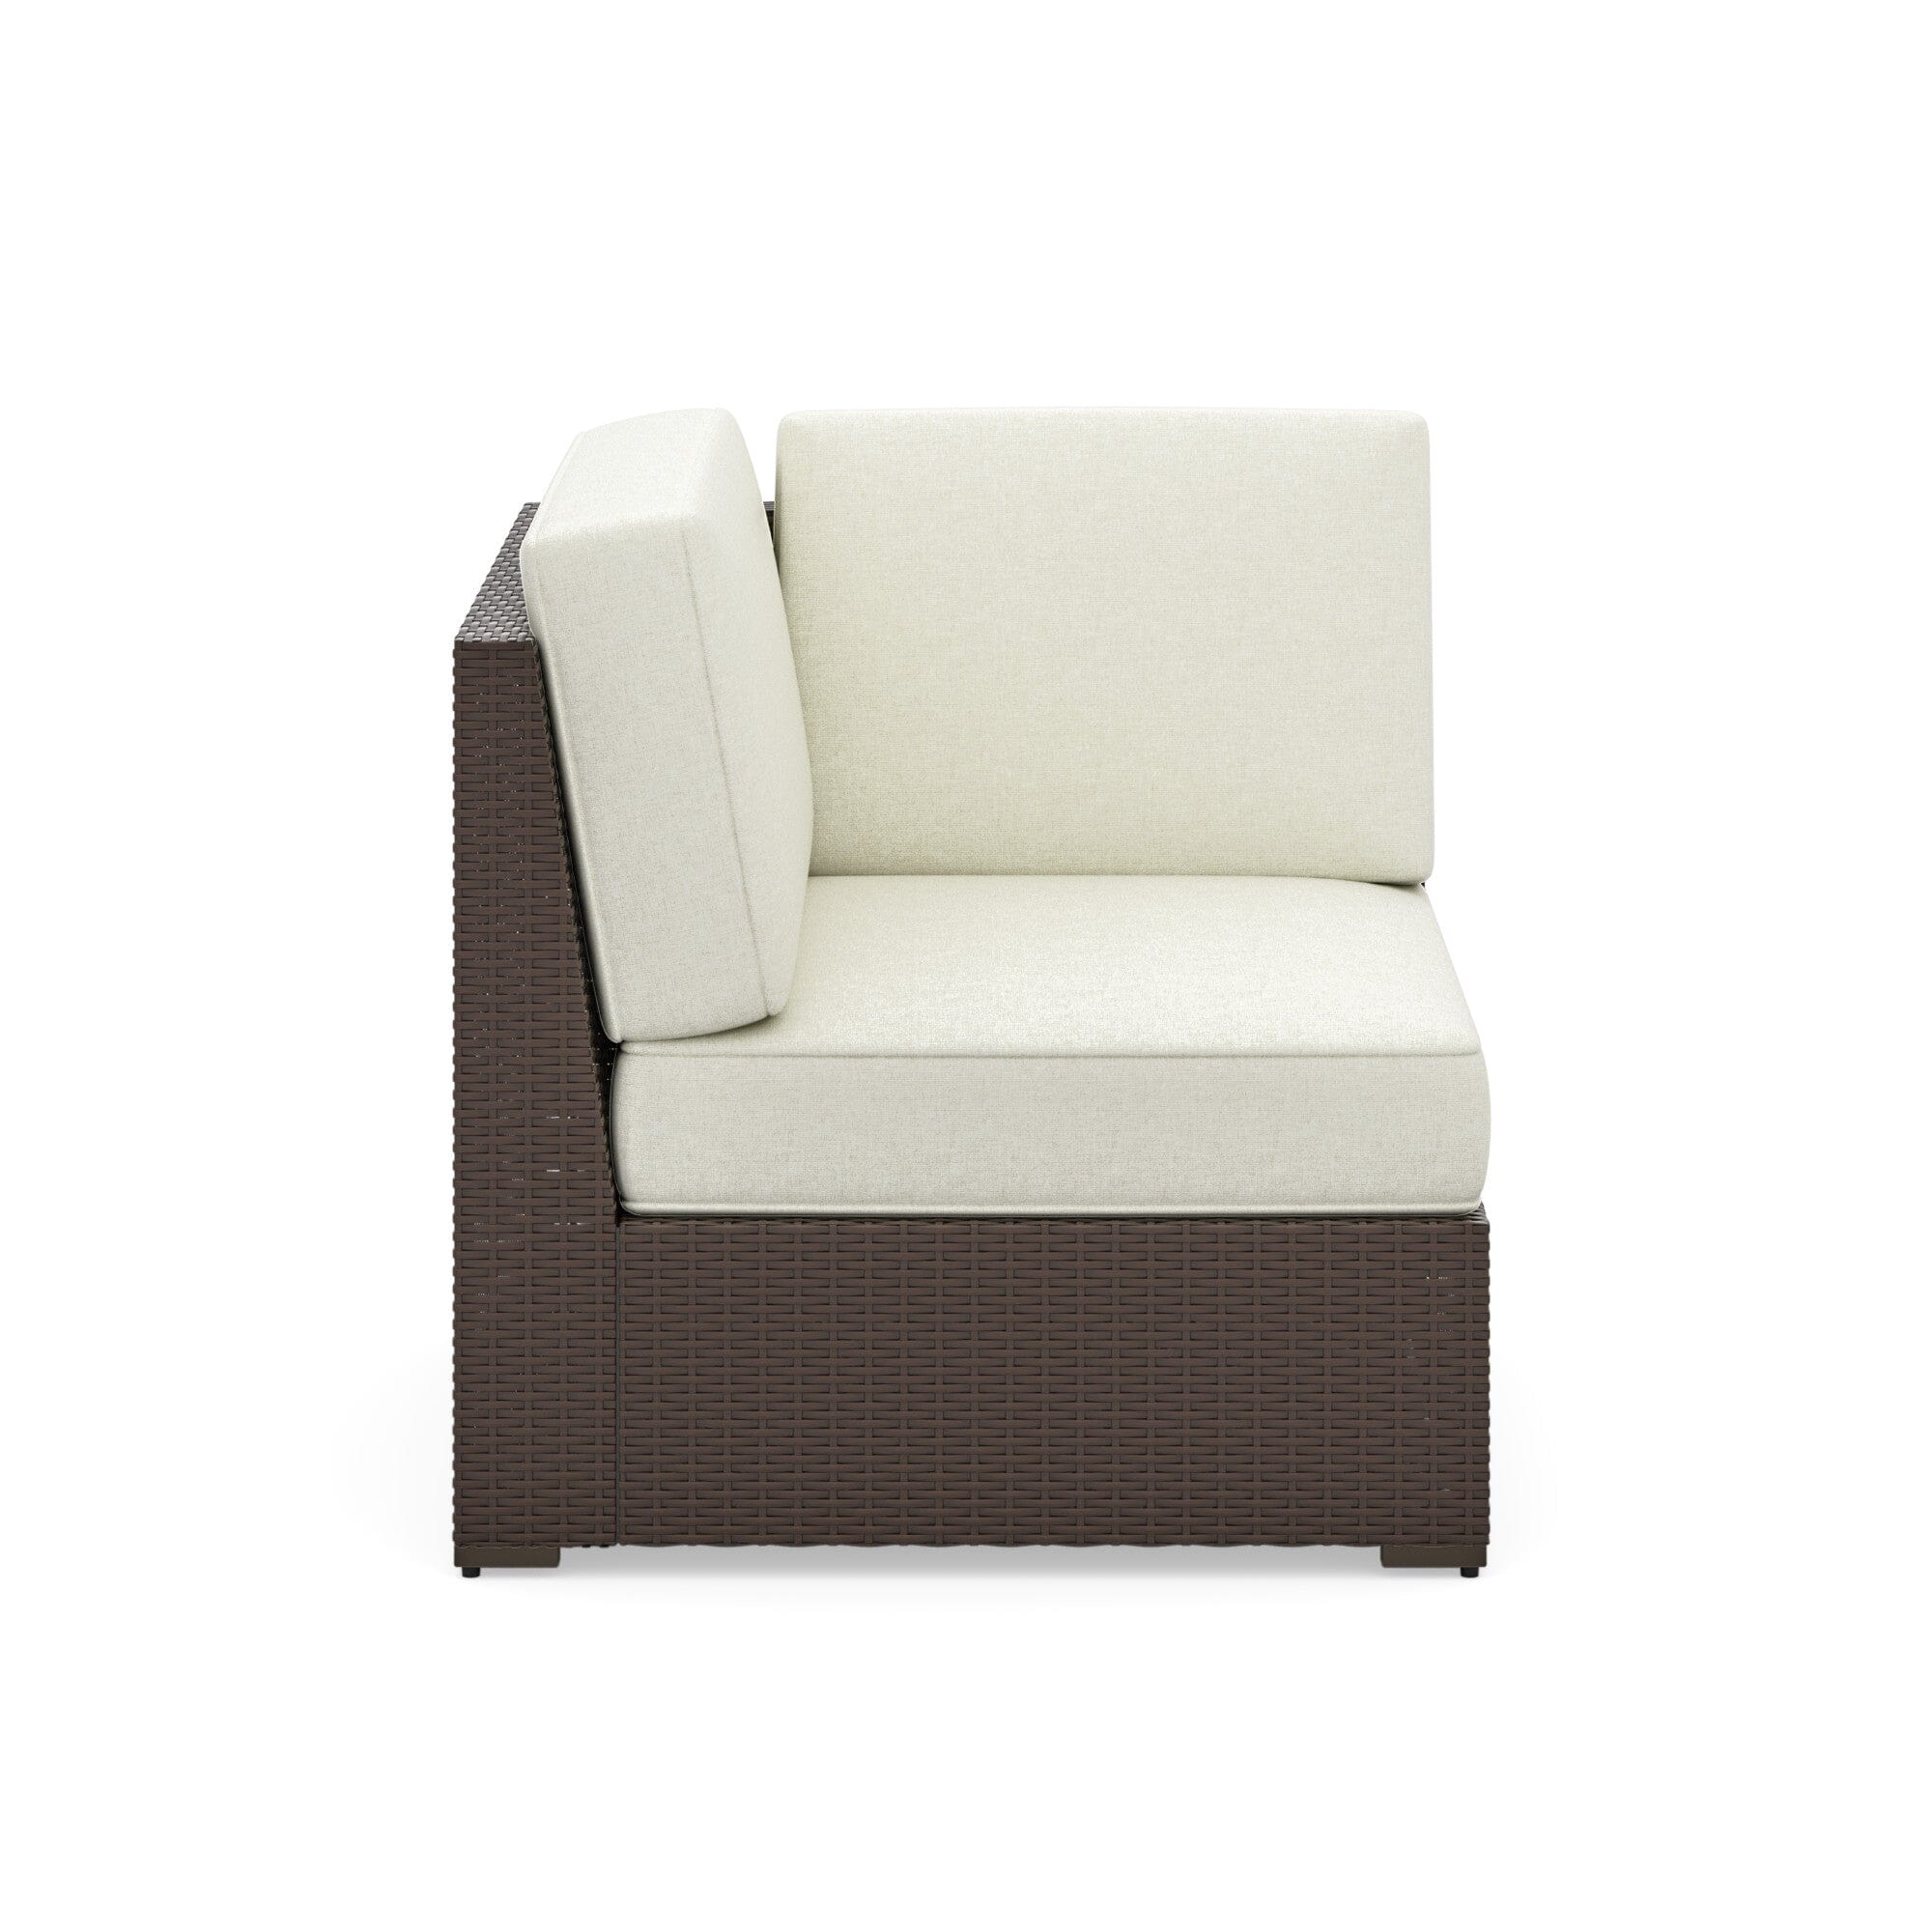 Modern & Contemporary Outdoor Sectional Side Chair By Palm Springs Outdoor Seating Palm Springs